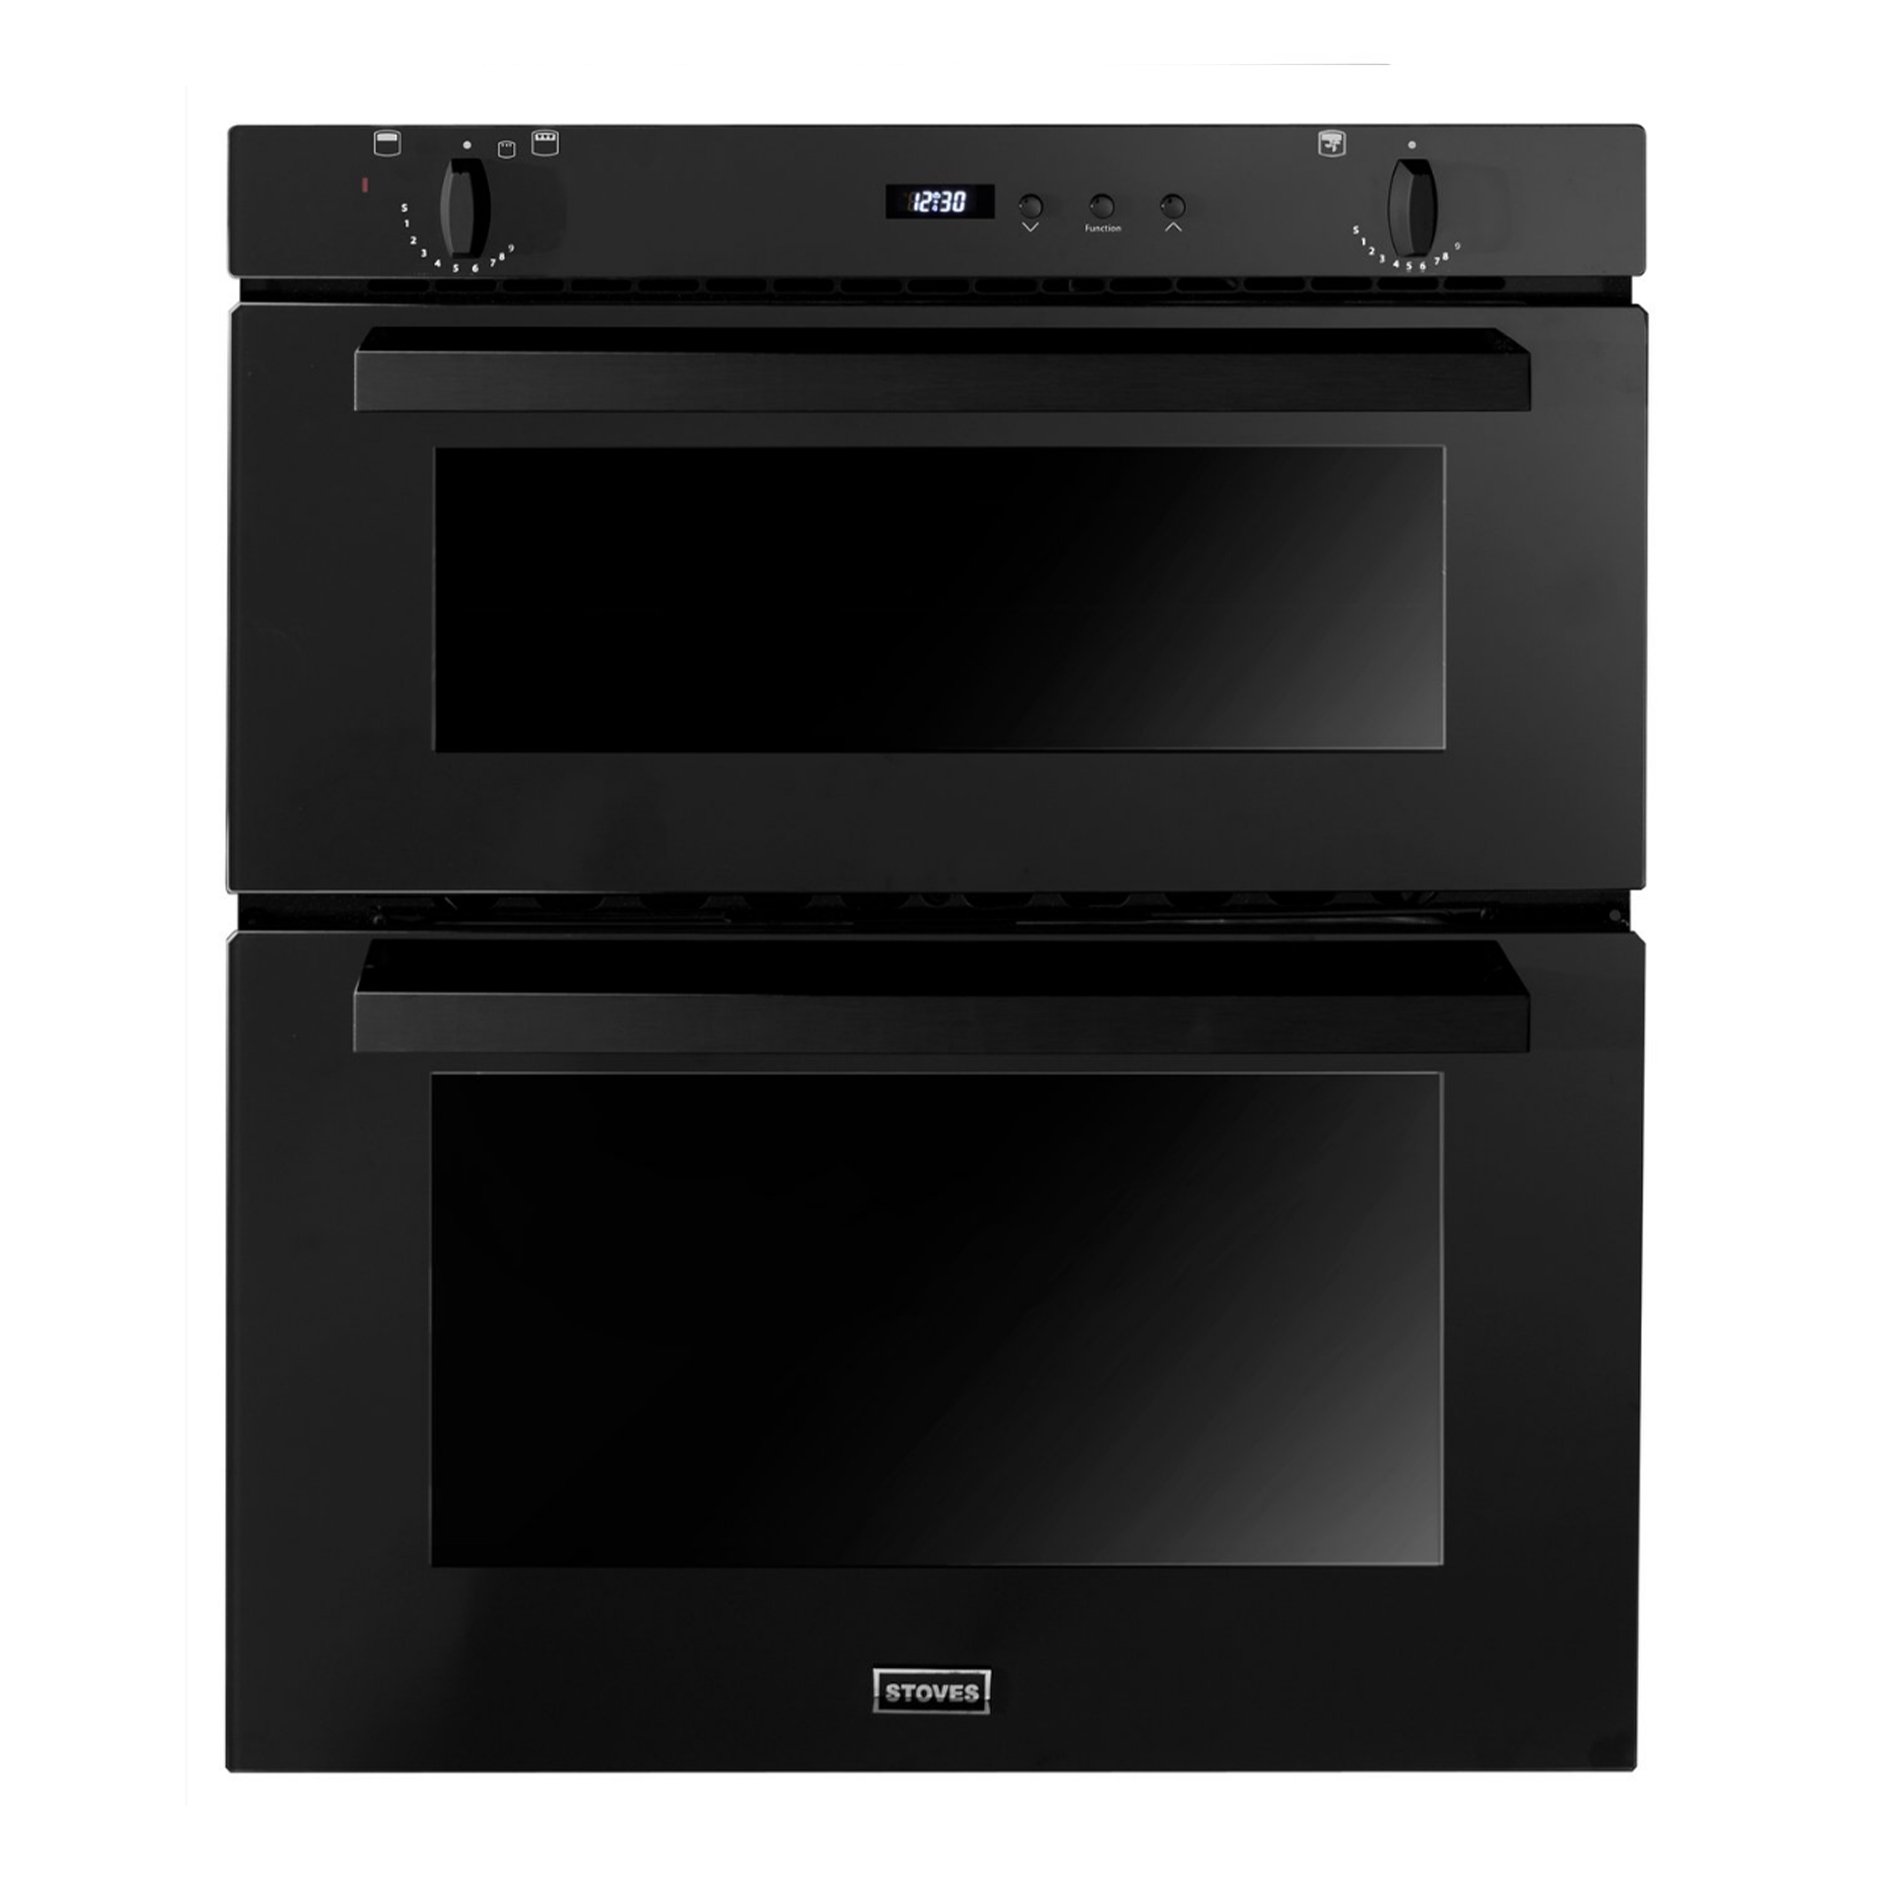 70cm built-under gas double oven. Additional features include cook-to-off timer, telescopic slider shelves & easy clean enamel. A/B energy rating.